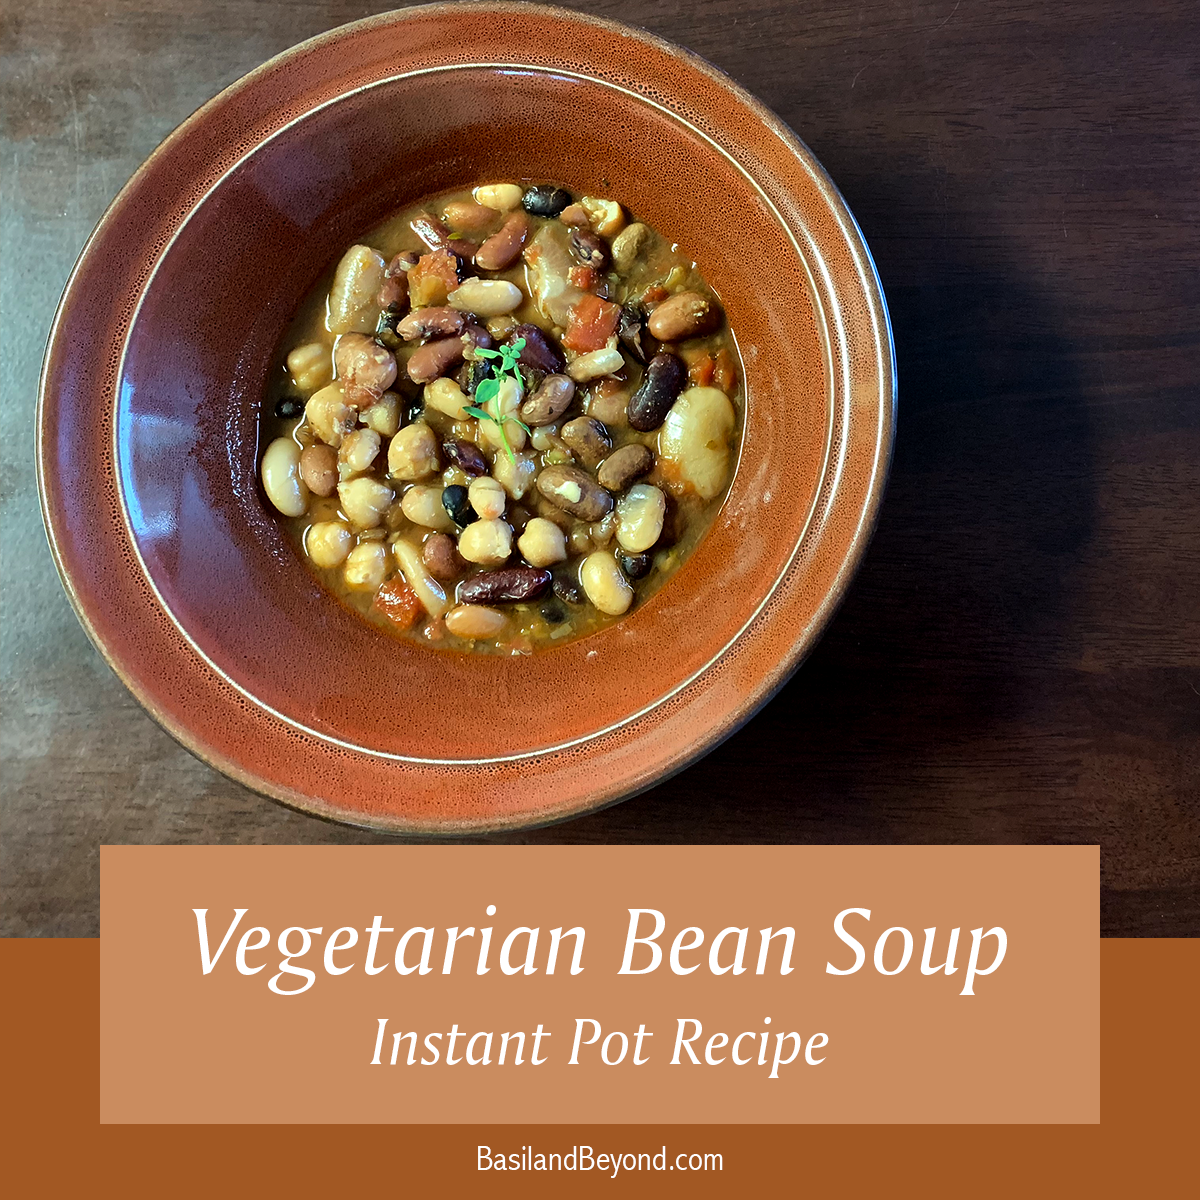 Instant Pot Vegetarian Bean Soup - Meat-free, gluten-free, dairy-free... but full of flavor!